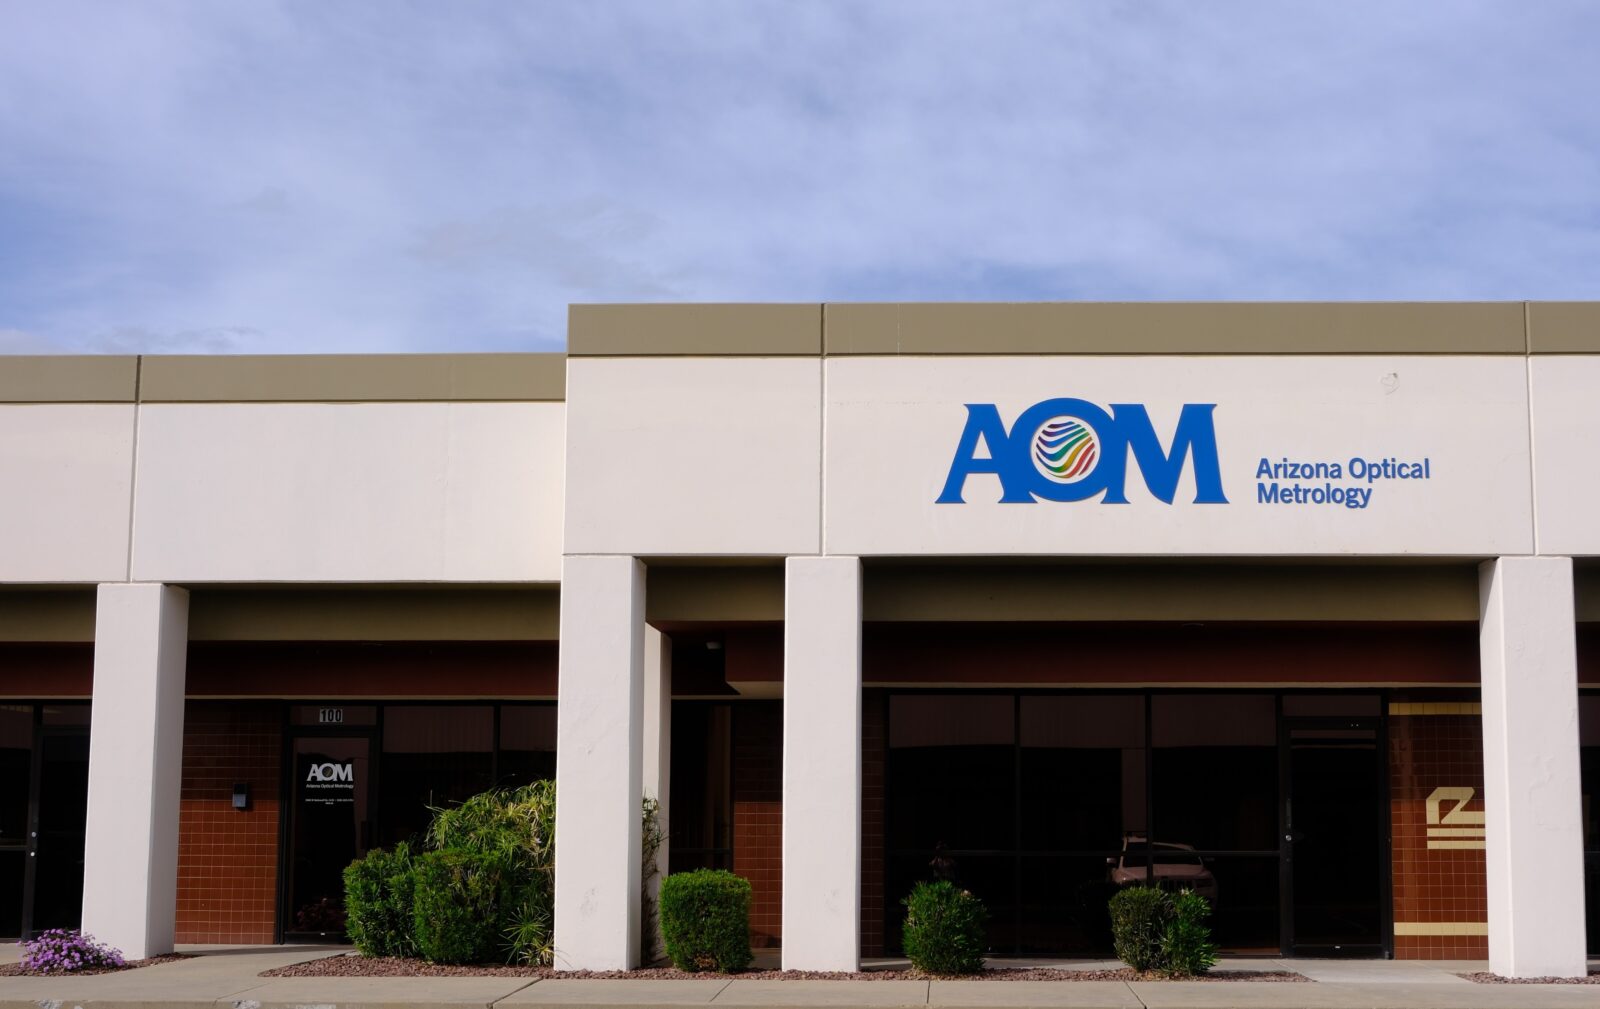 Exterior of new AOM office building with a metal sign of the logo